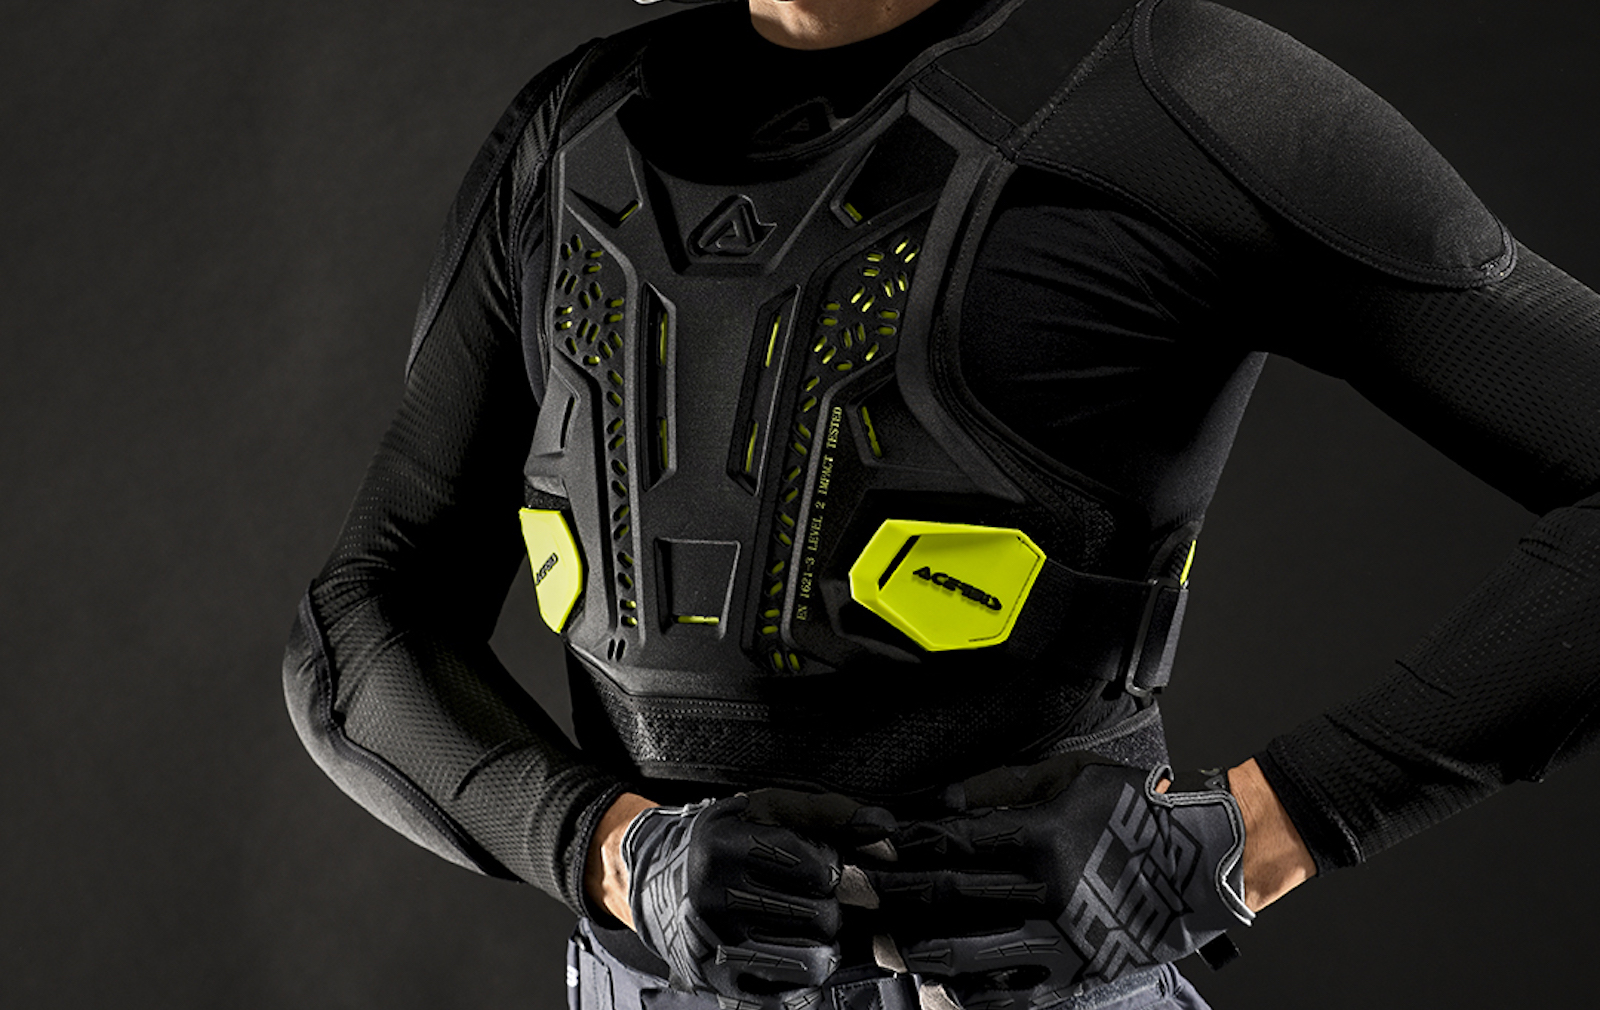 https://www.ebikecult.it/wp-content/uploads/2020/12/BODY-ARMOUR-1-copia.jpeg